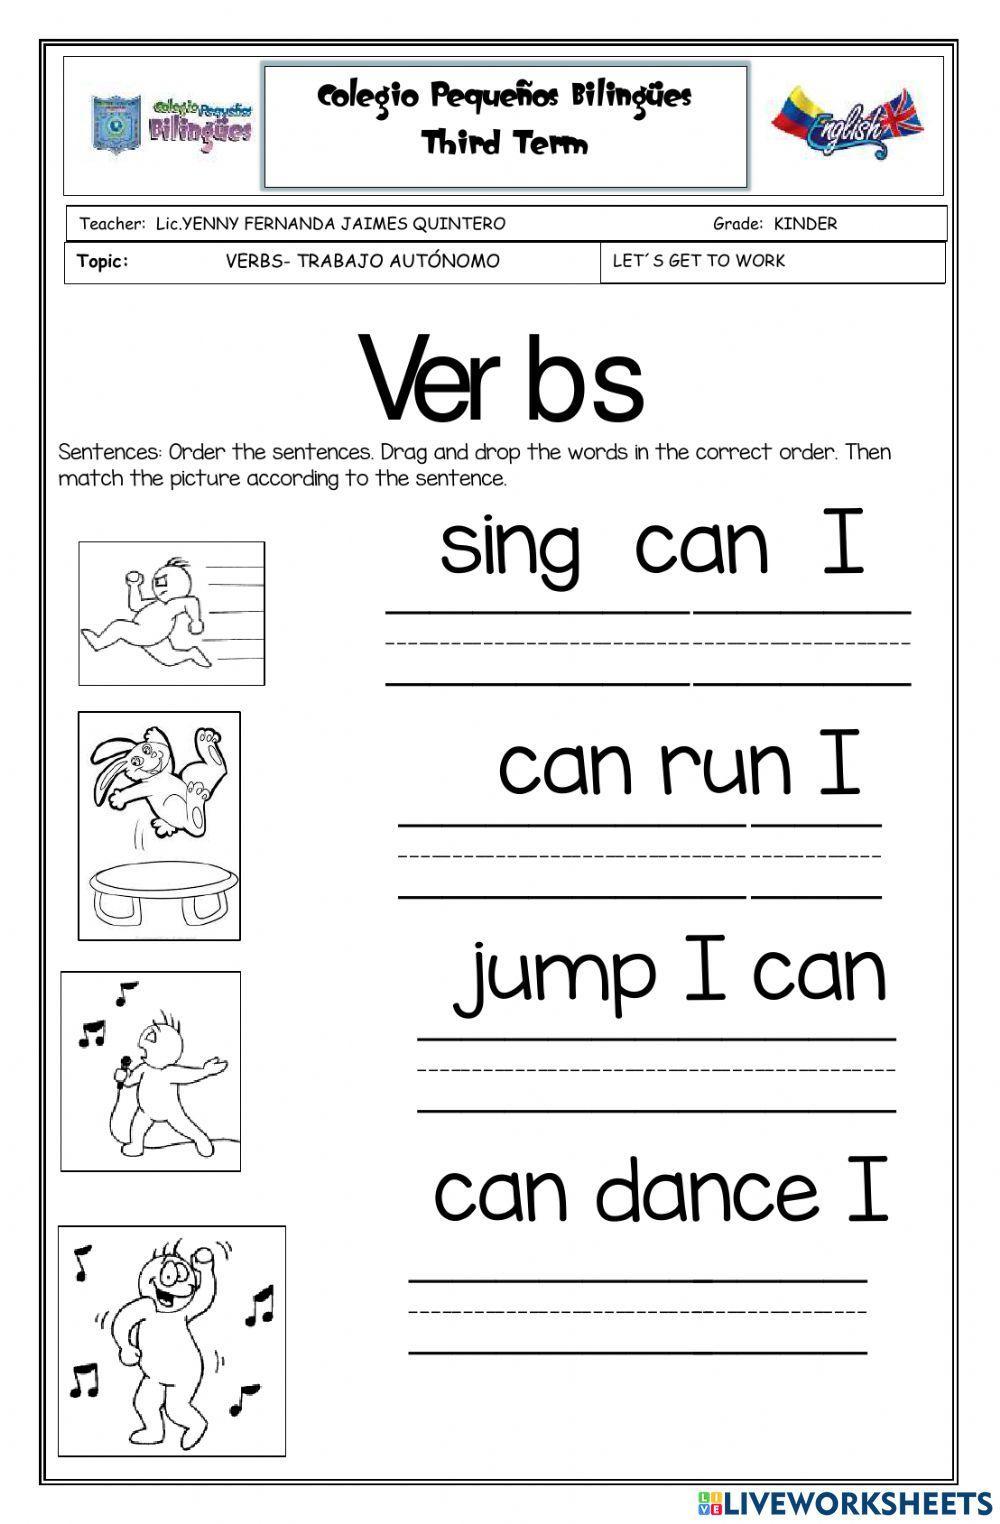 Let's get to work -verbs